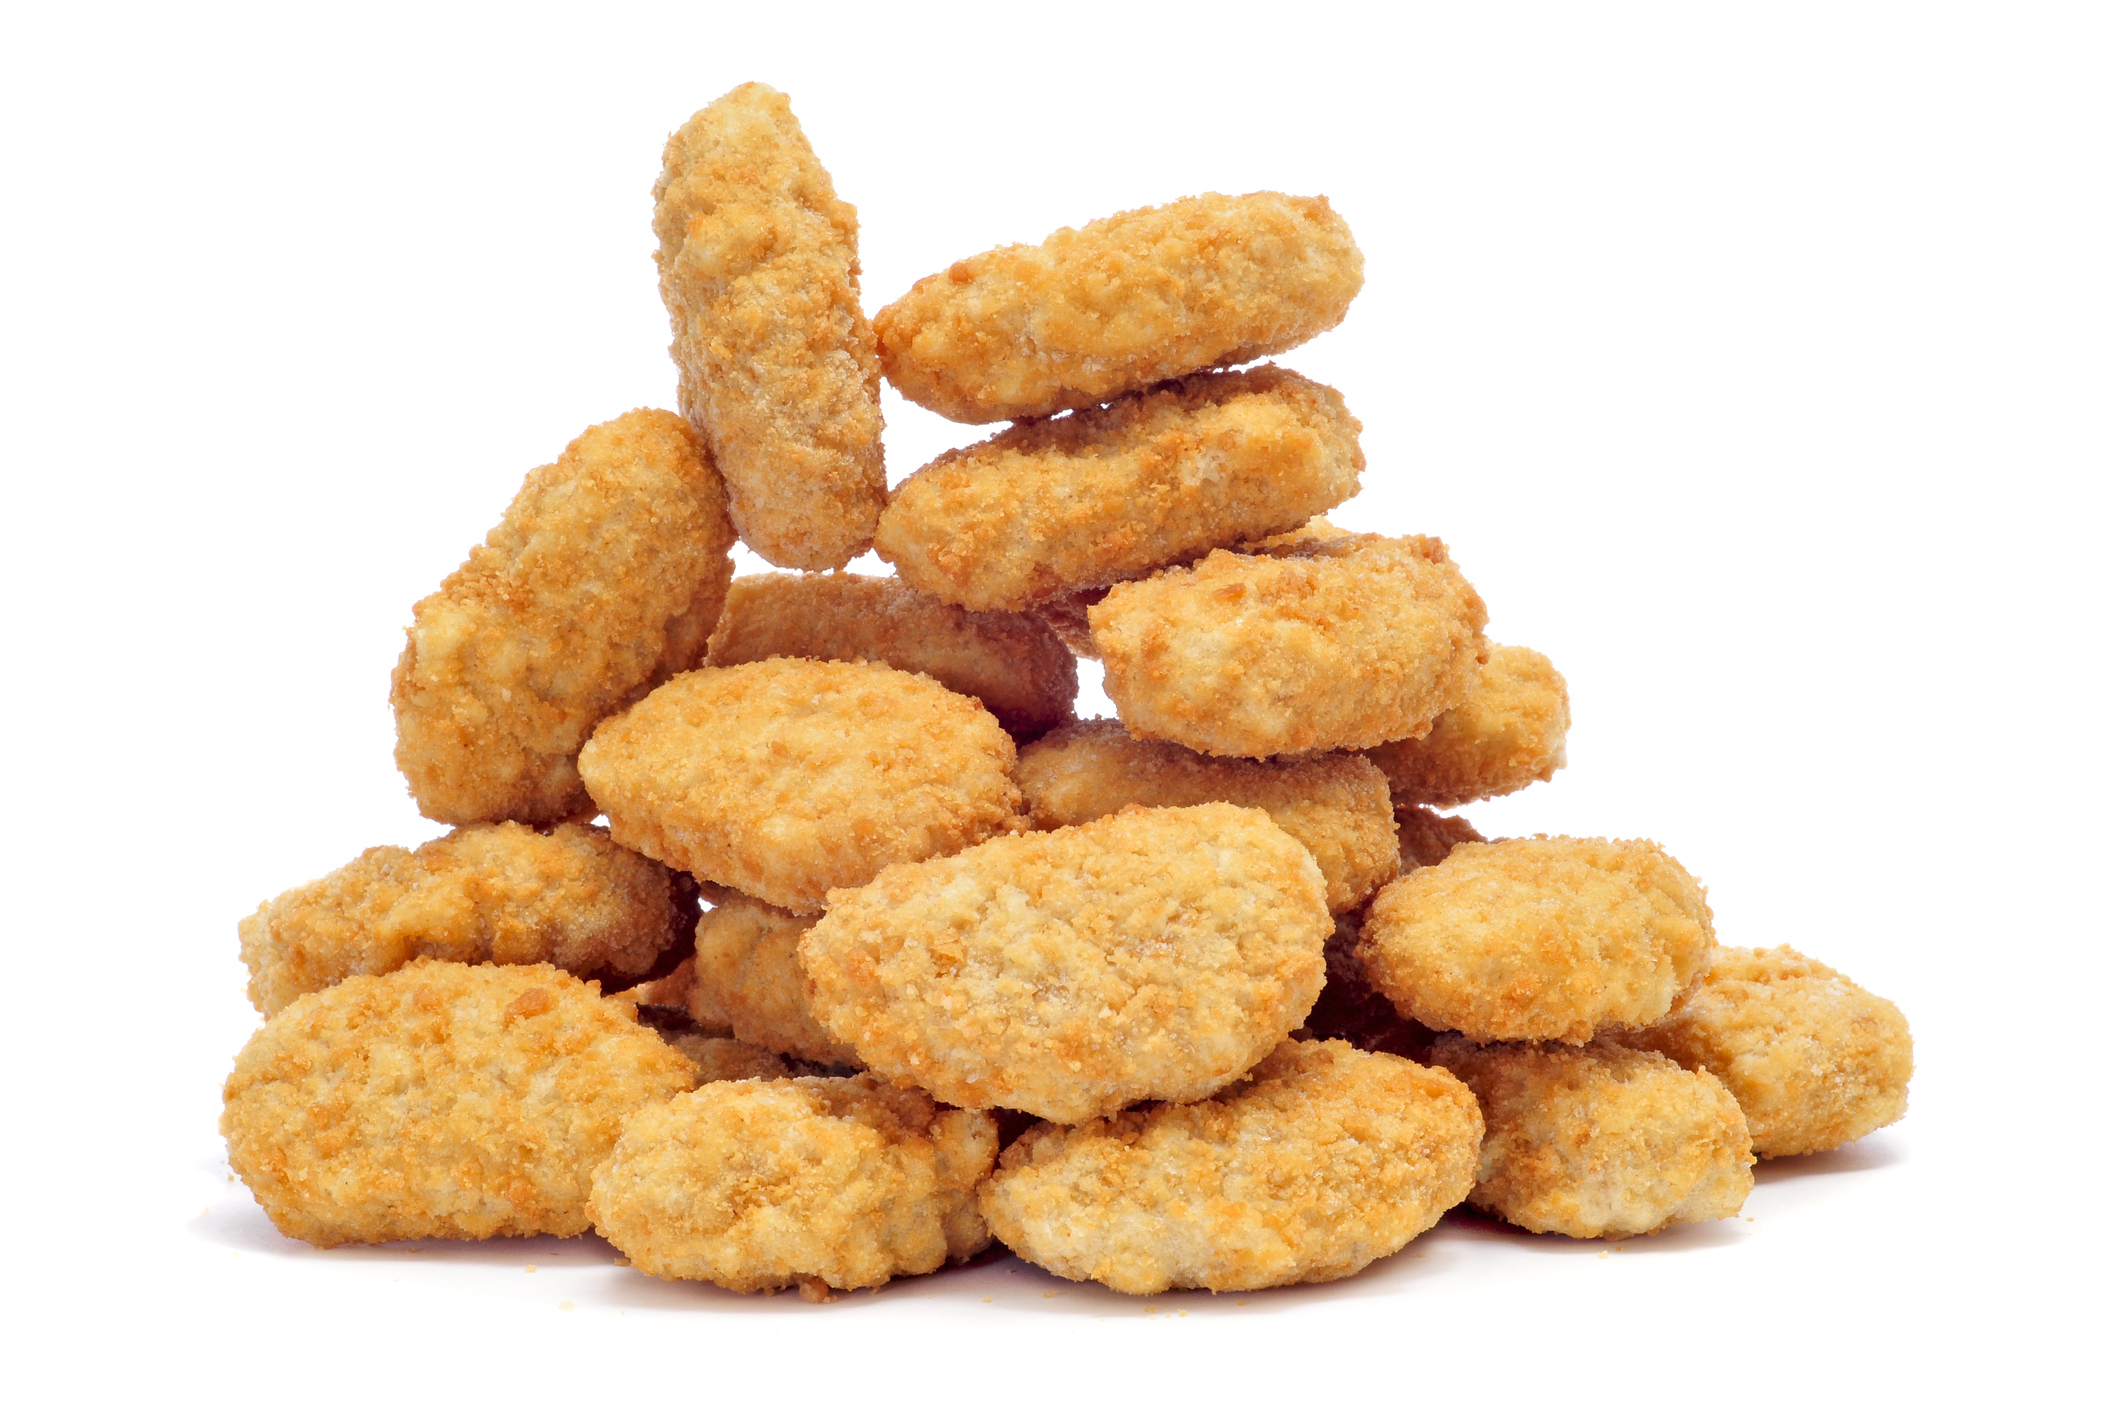 Student suspended for extra chicken nugget | wcnc.com